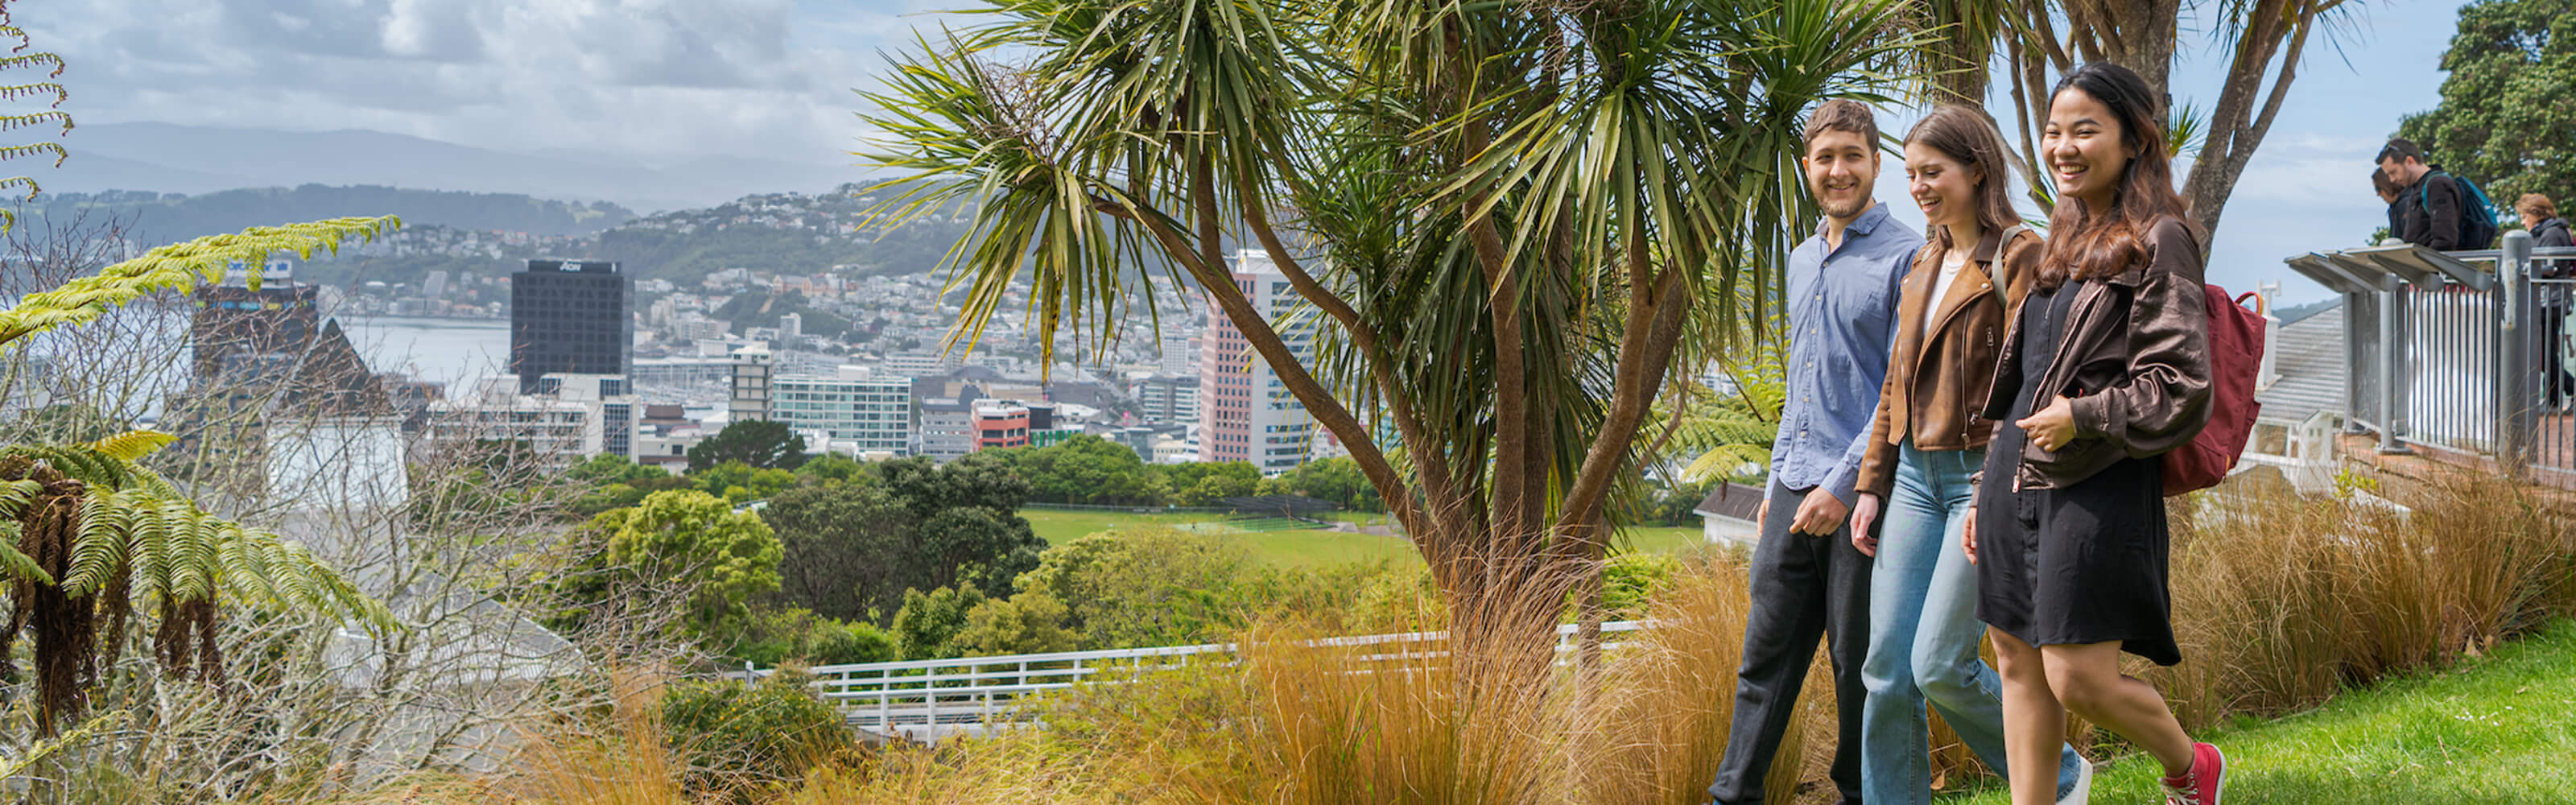 Students exploring Botanical garden with Wellington city view in background.